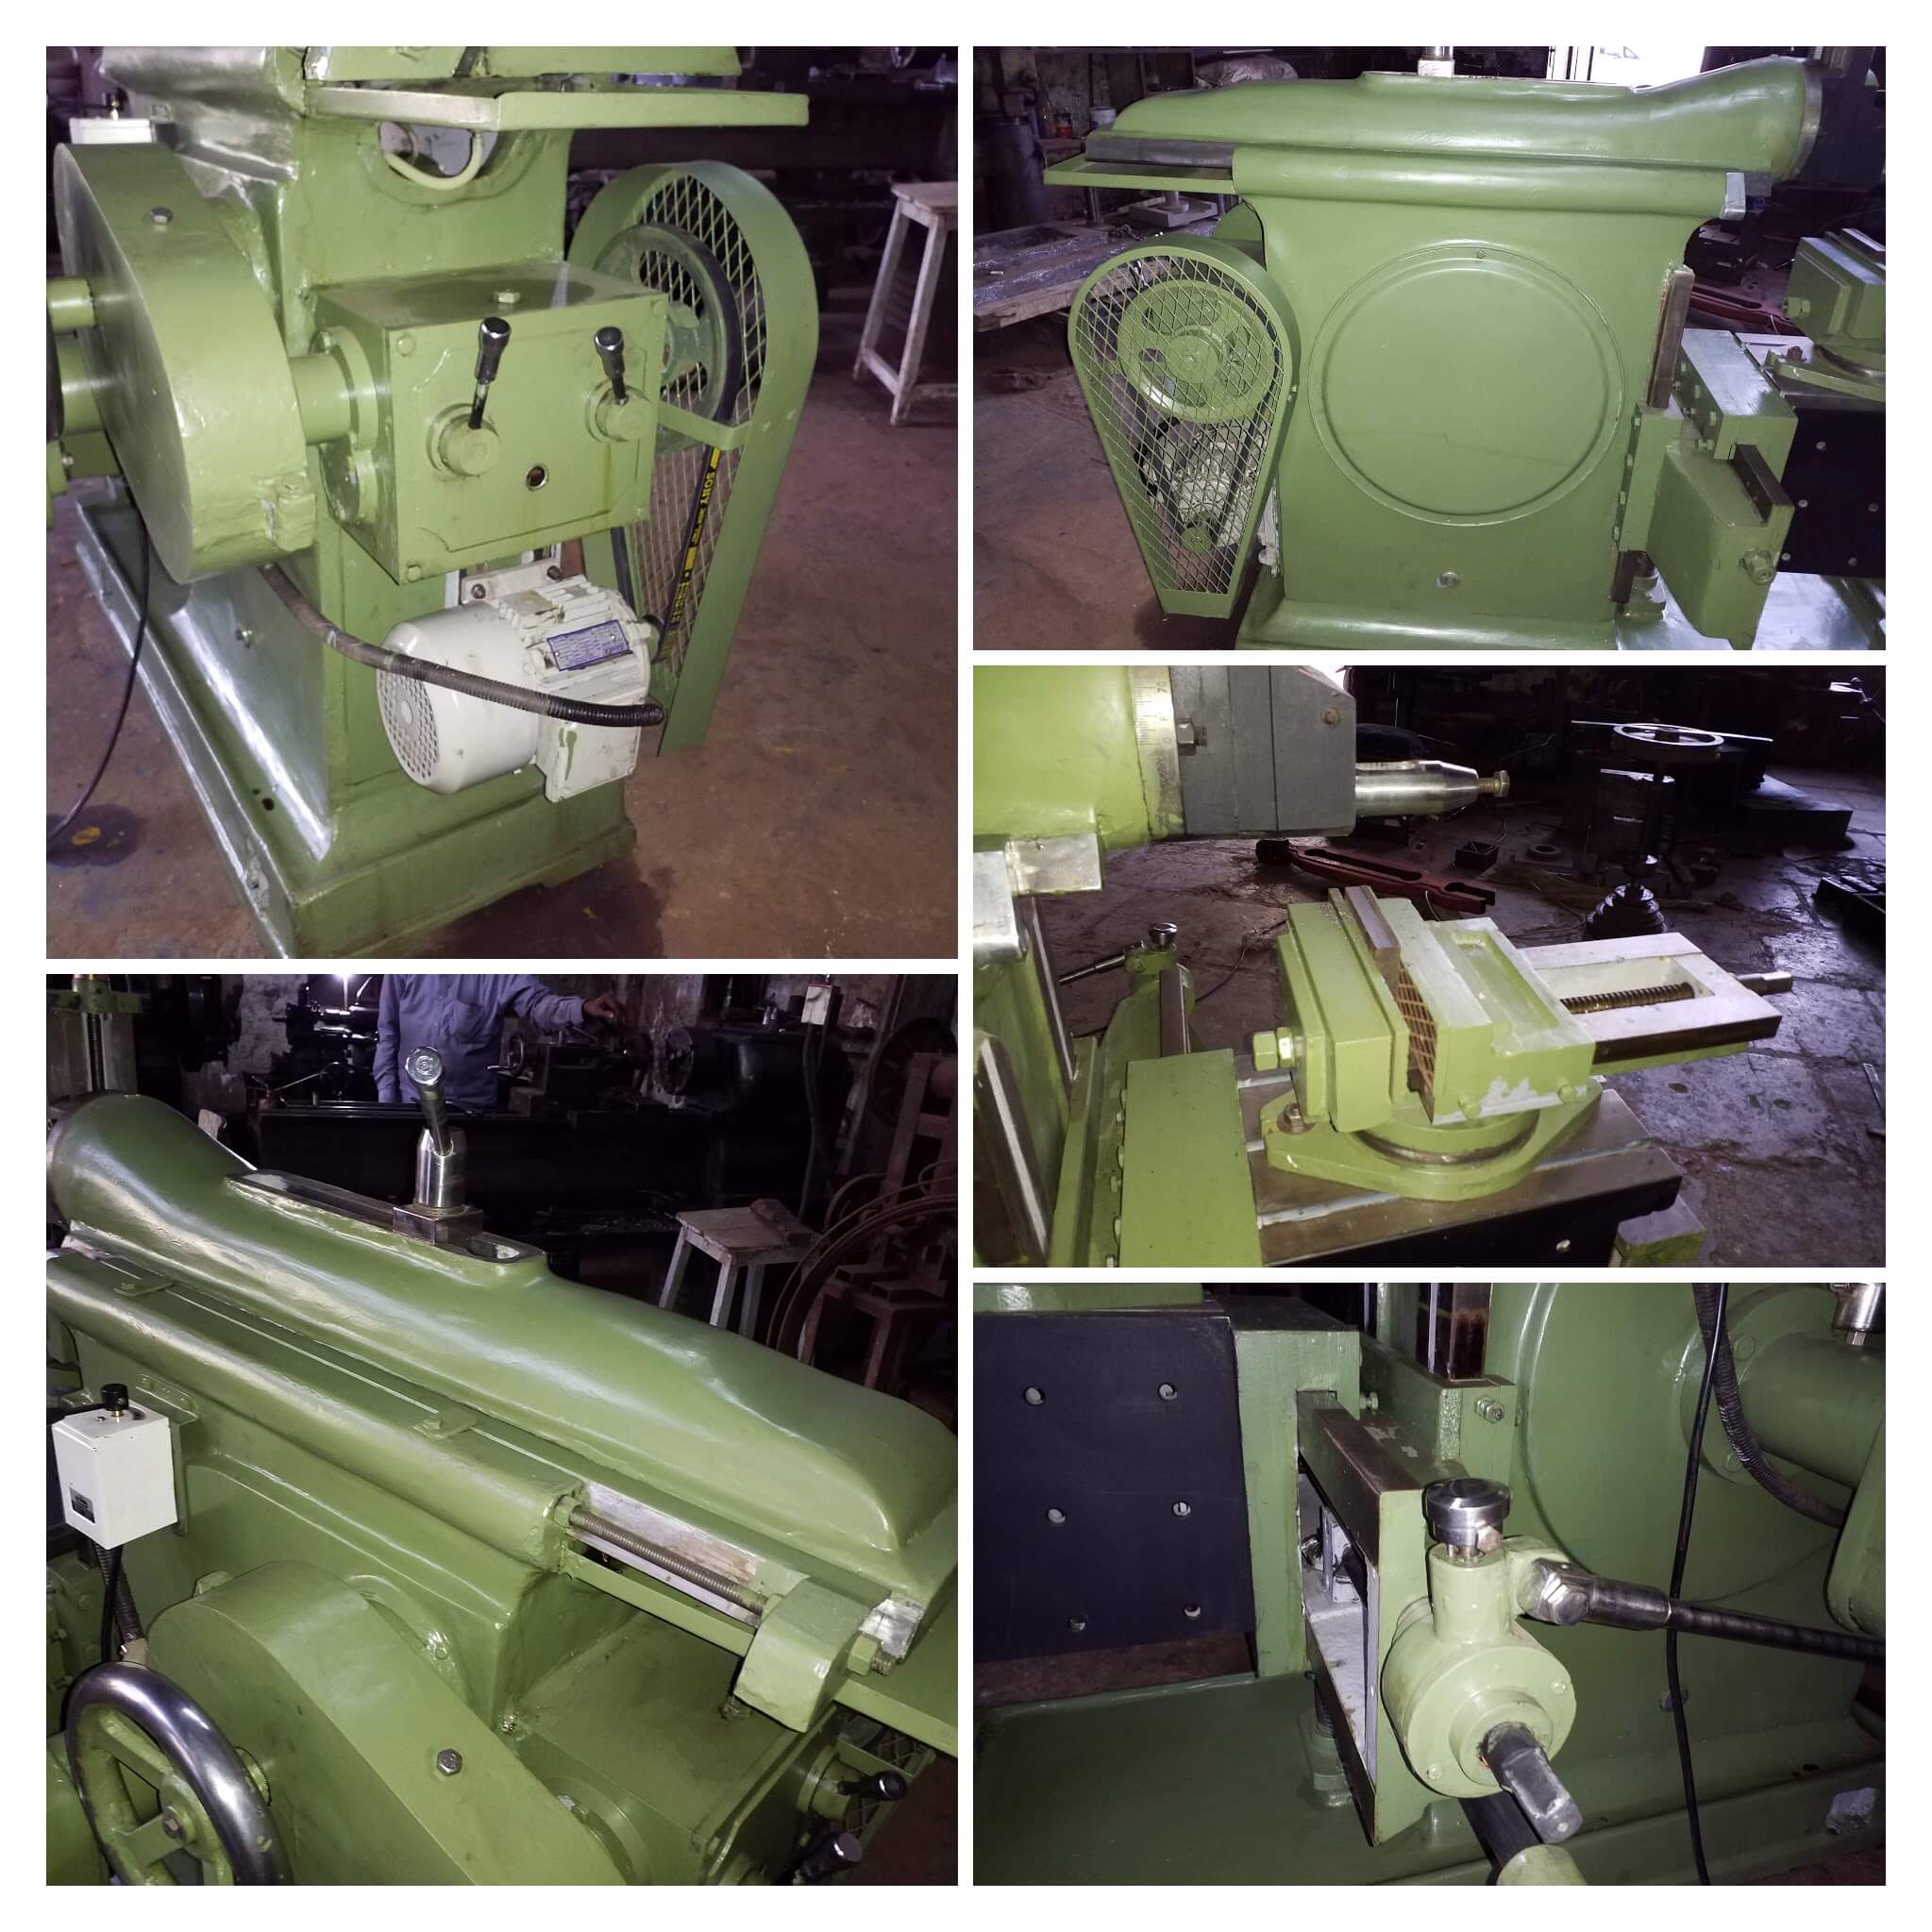 18inch Industrial Shaping Machine Manufacturer Supplier from